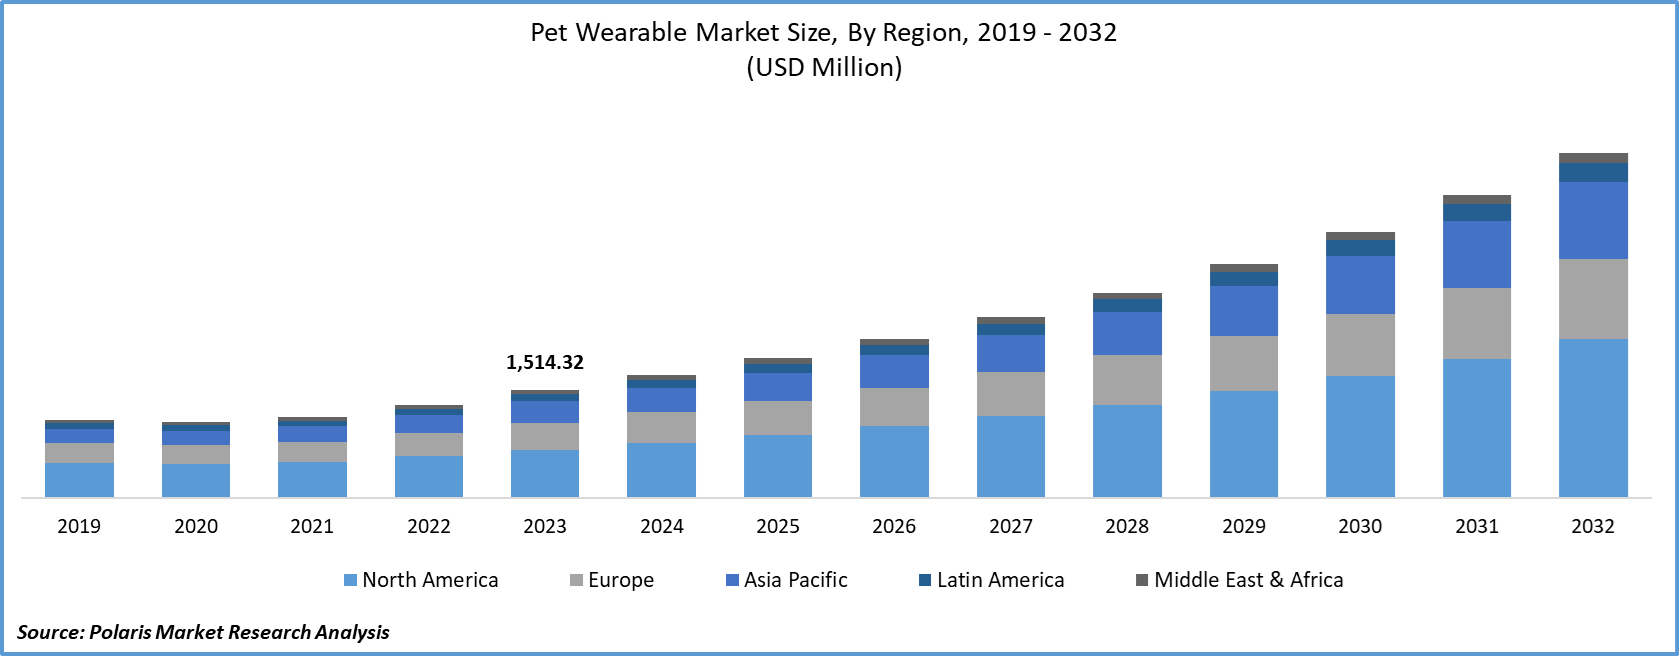 Veterinary Wearable Devices Market